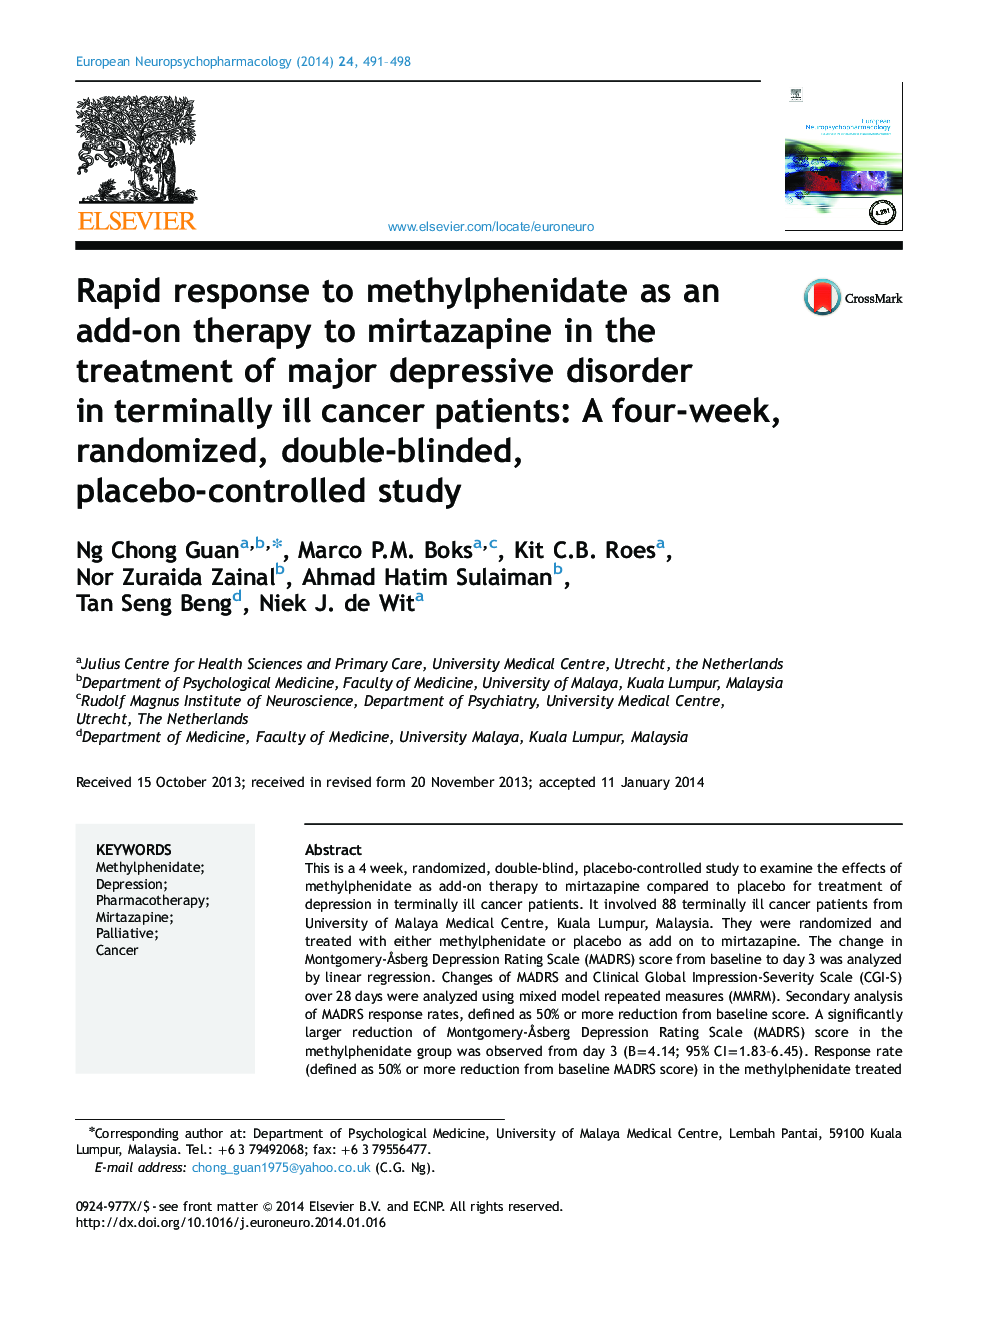 Rapid response to methylphenidate as an add-on therapy to mirtazapine in the treatment of major depressive disorder in terminally ill cancer patients: A four-week, randomized, double-blinded, placebo-controlled study